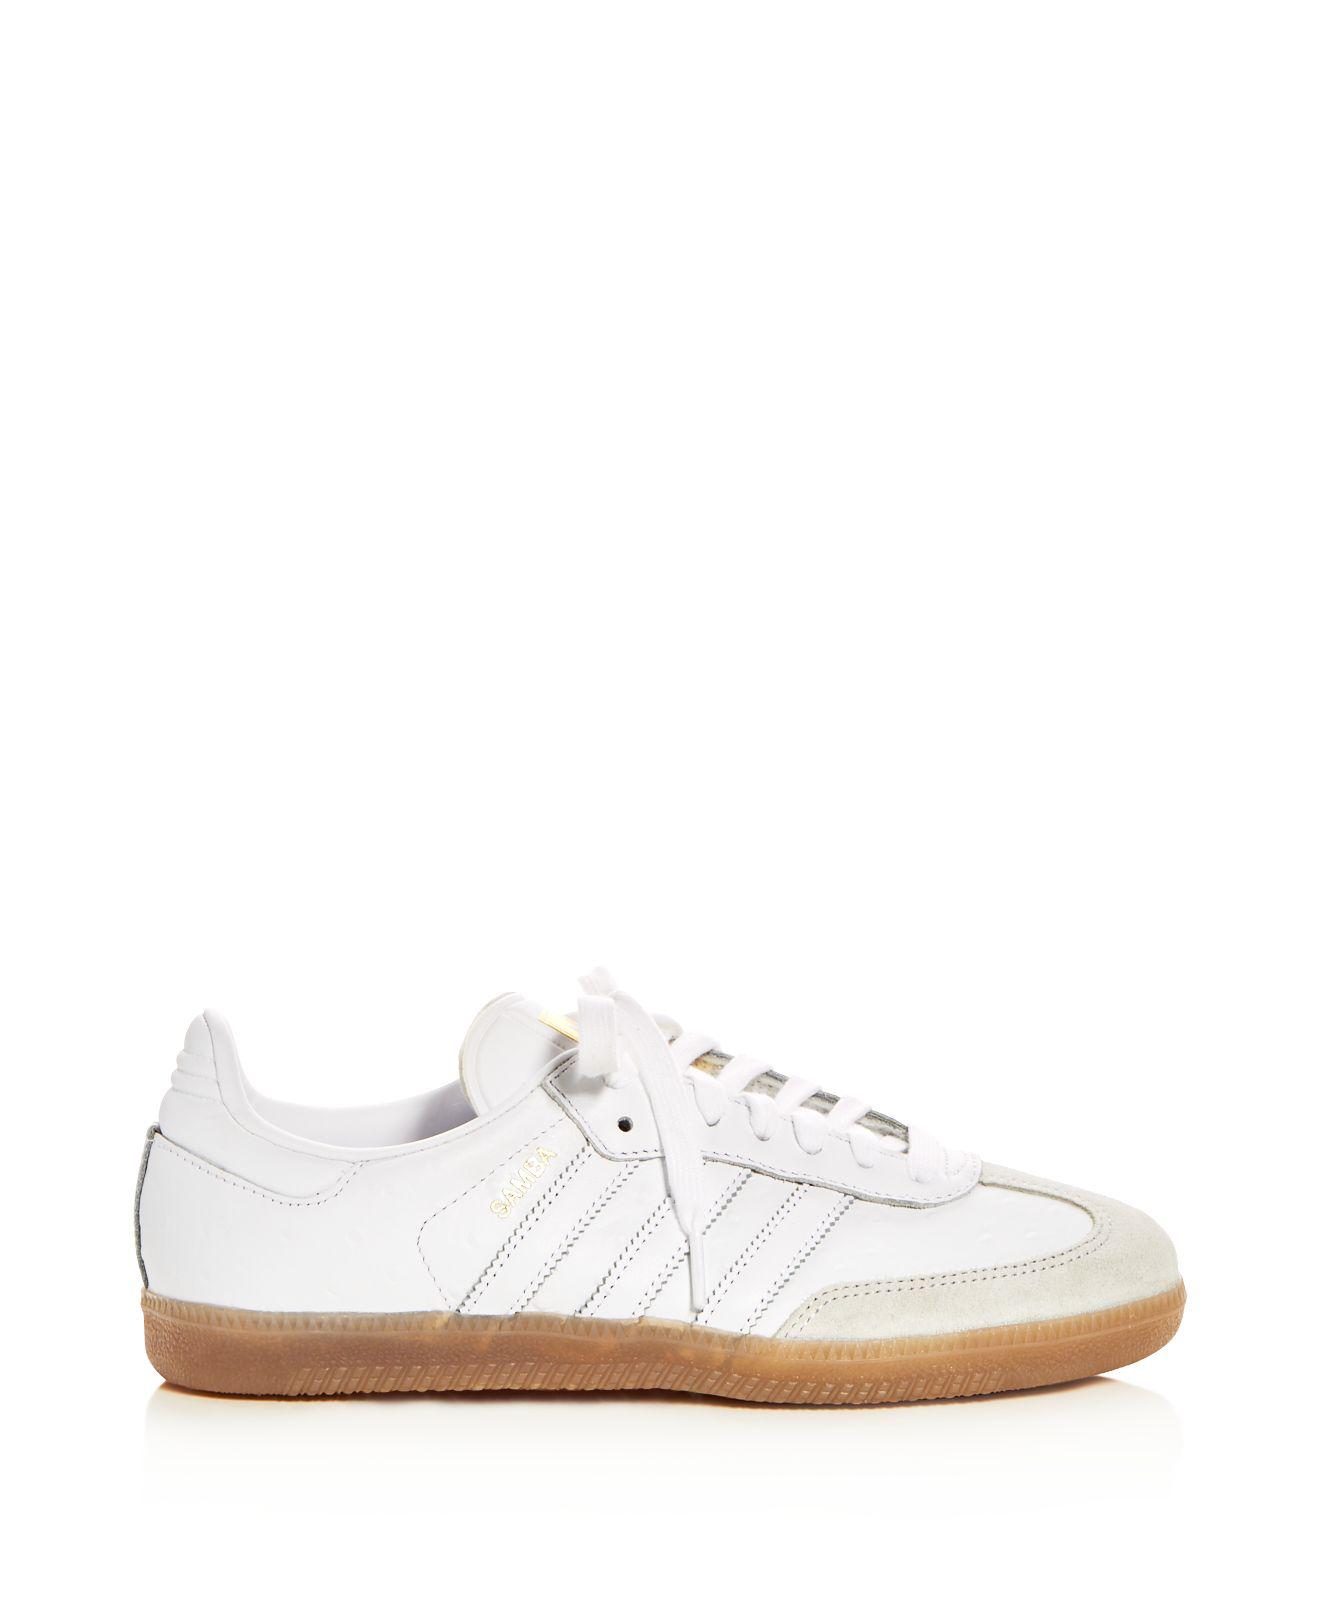 adidas Women's Samba Leather Lace Up Sneakers in White Lyst